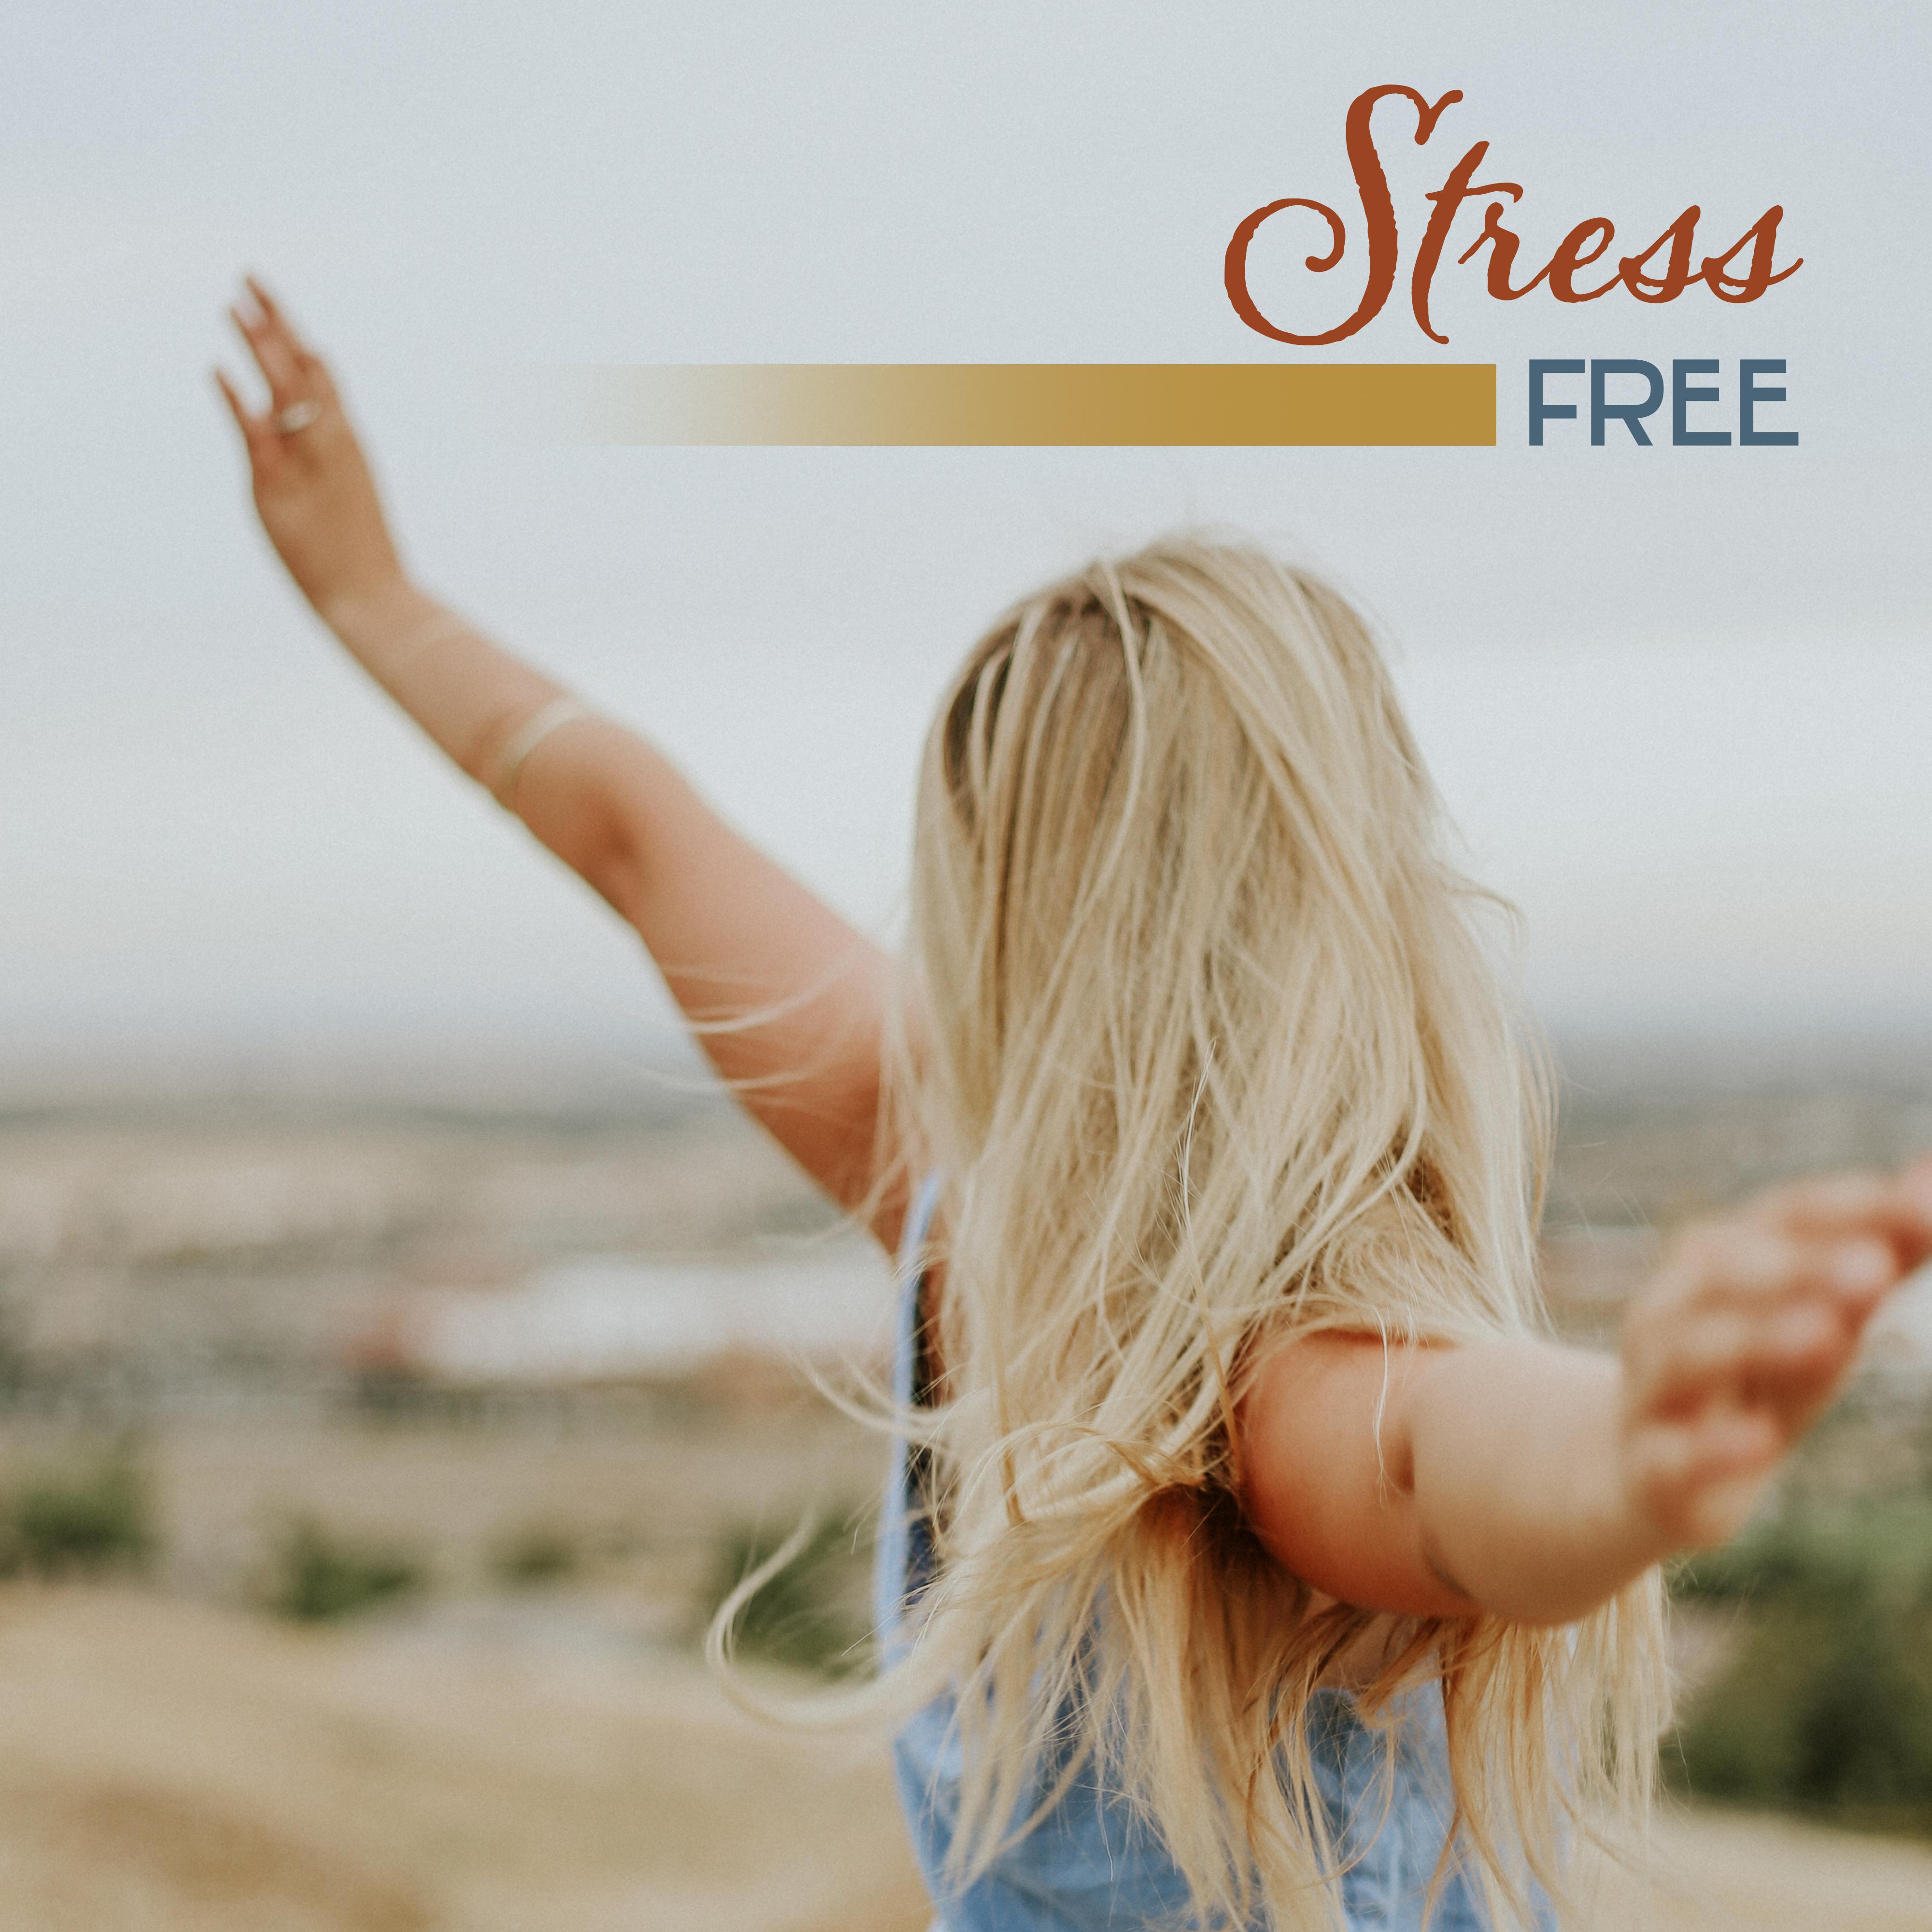 Stress Free – Calming Music Therapy,  New Age Relaxation, Sounds of Nature, Helpful for Stress Relief